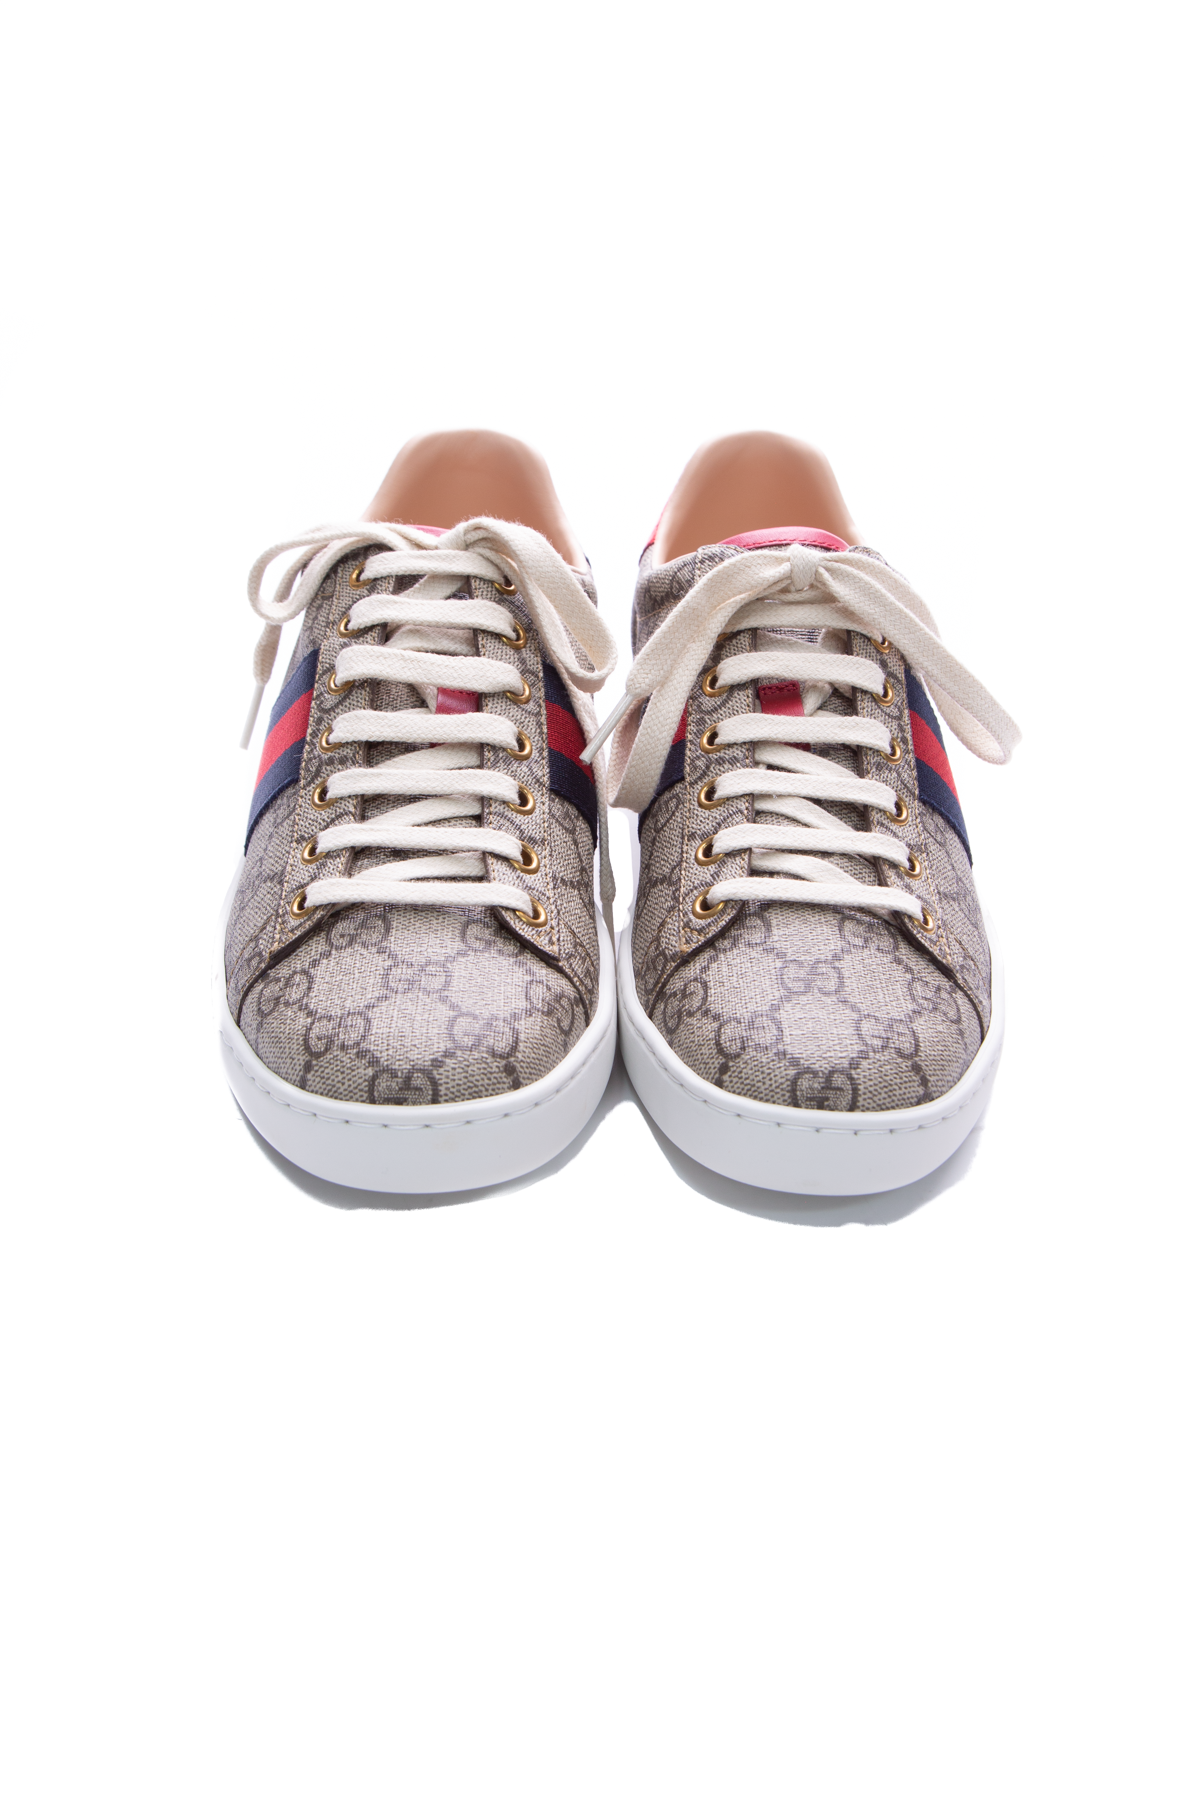 Gucci Ace Sneakers - Size 39